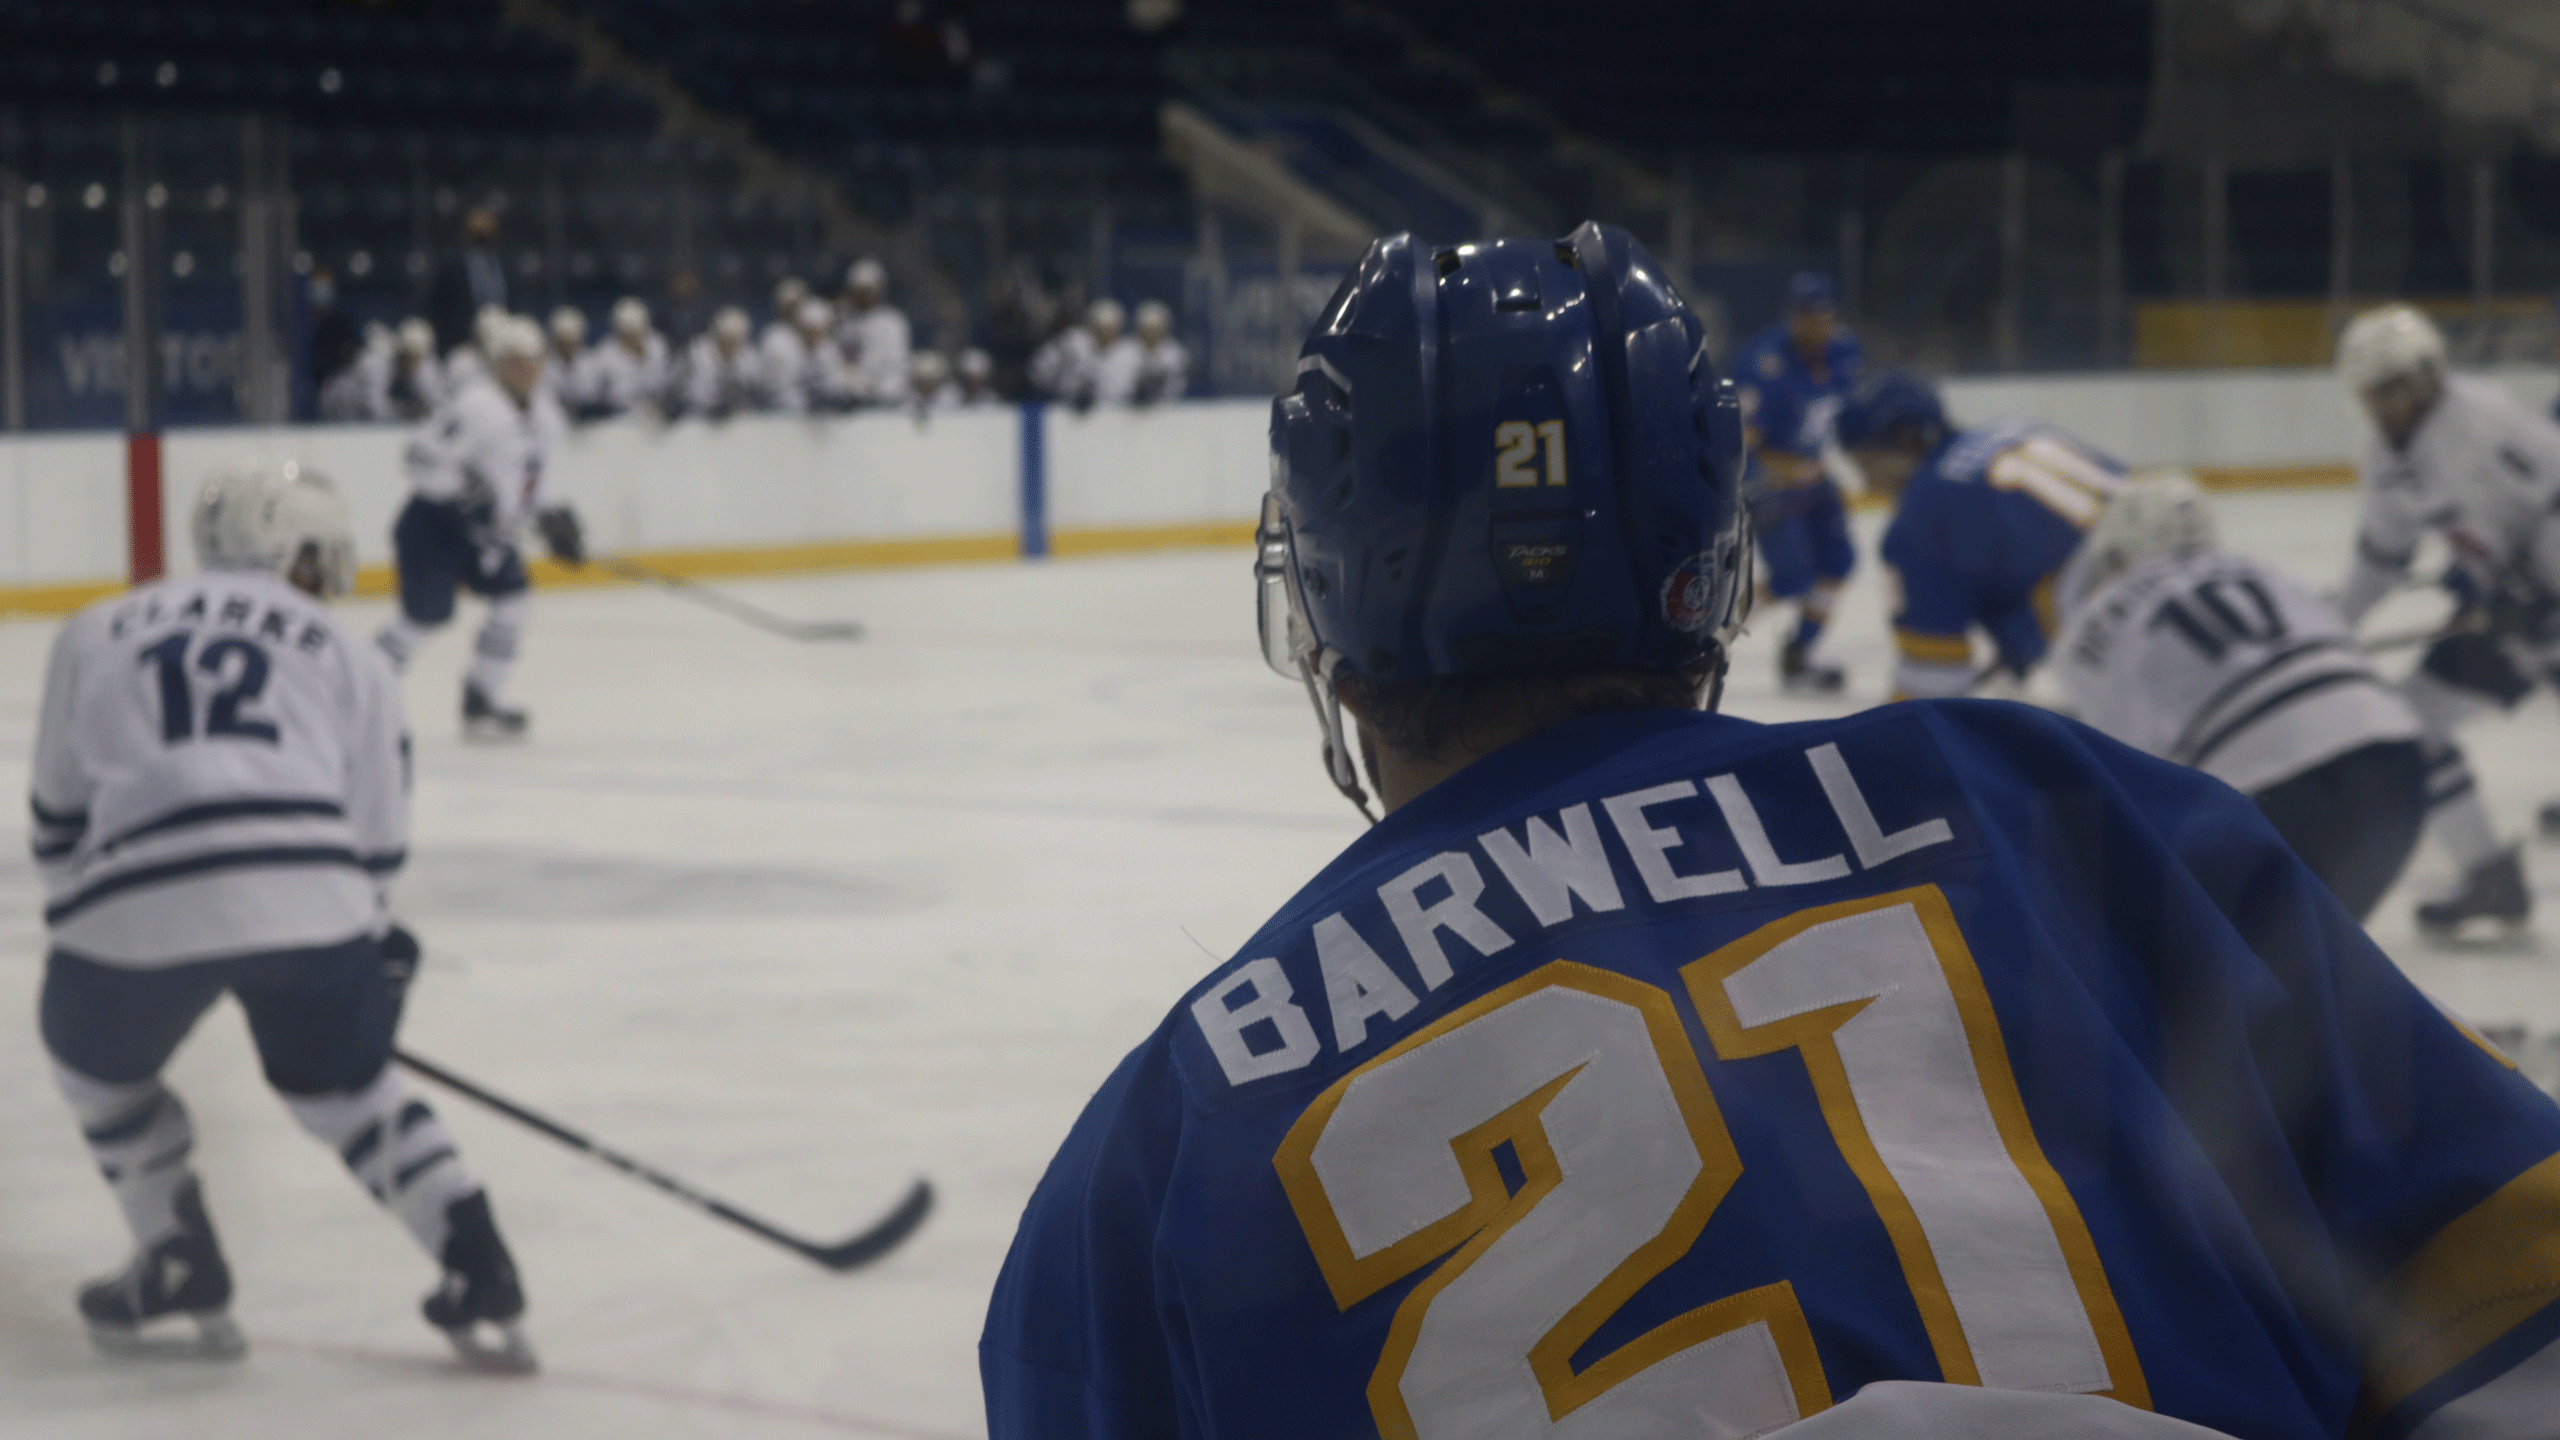 A Rams men's hockey player with the last name "Barwell" on his blue jersey comes into frame